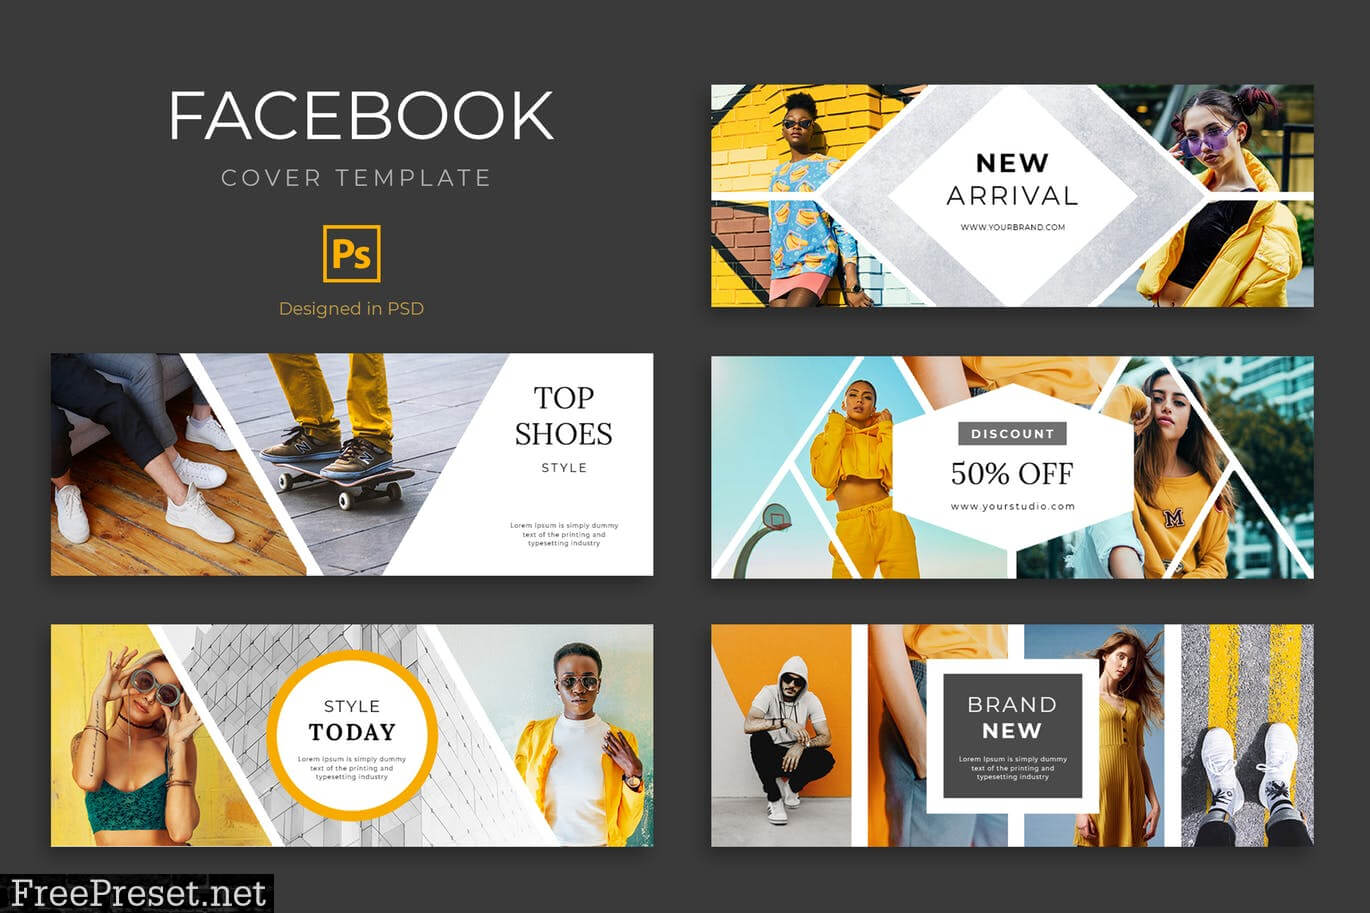 Urban Fashion Facebook Cover Template H8Y3Xku Intended For Photoshop Facebook Banner Template